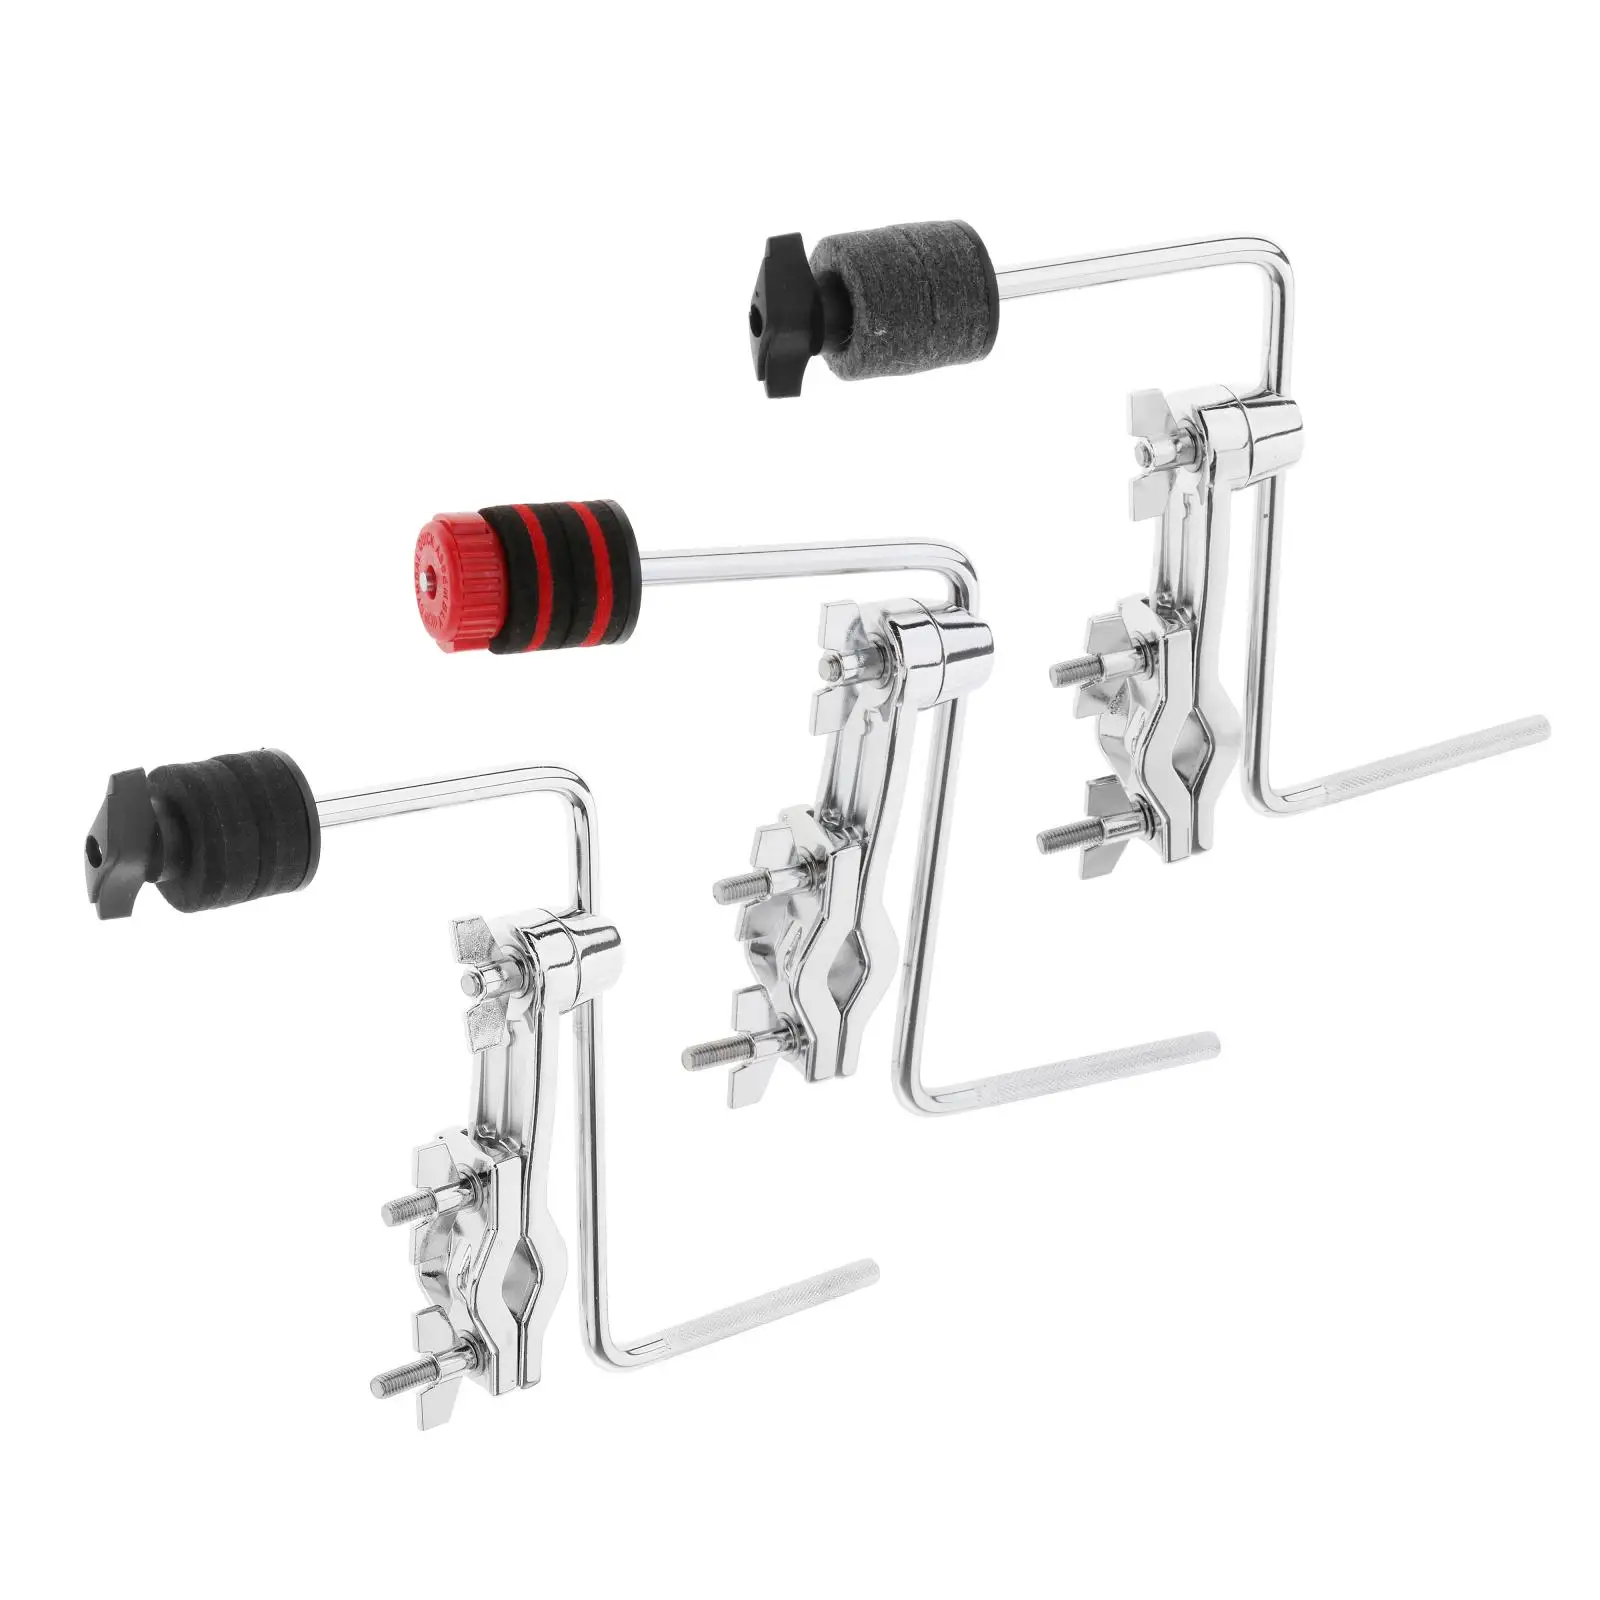 Cymbal Stacker Attachment with Solid Boom Arm Cymbal Stand Holder for Drum Hardware Boom Set Accessories Drum Arm Holder